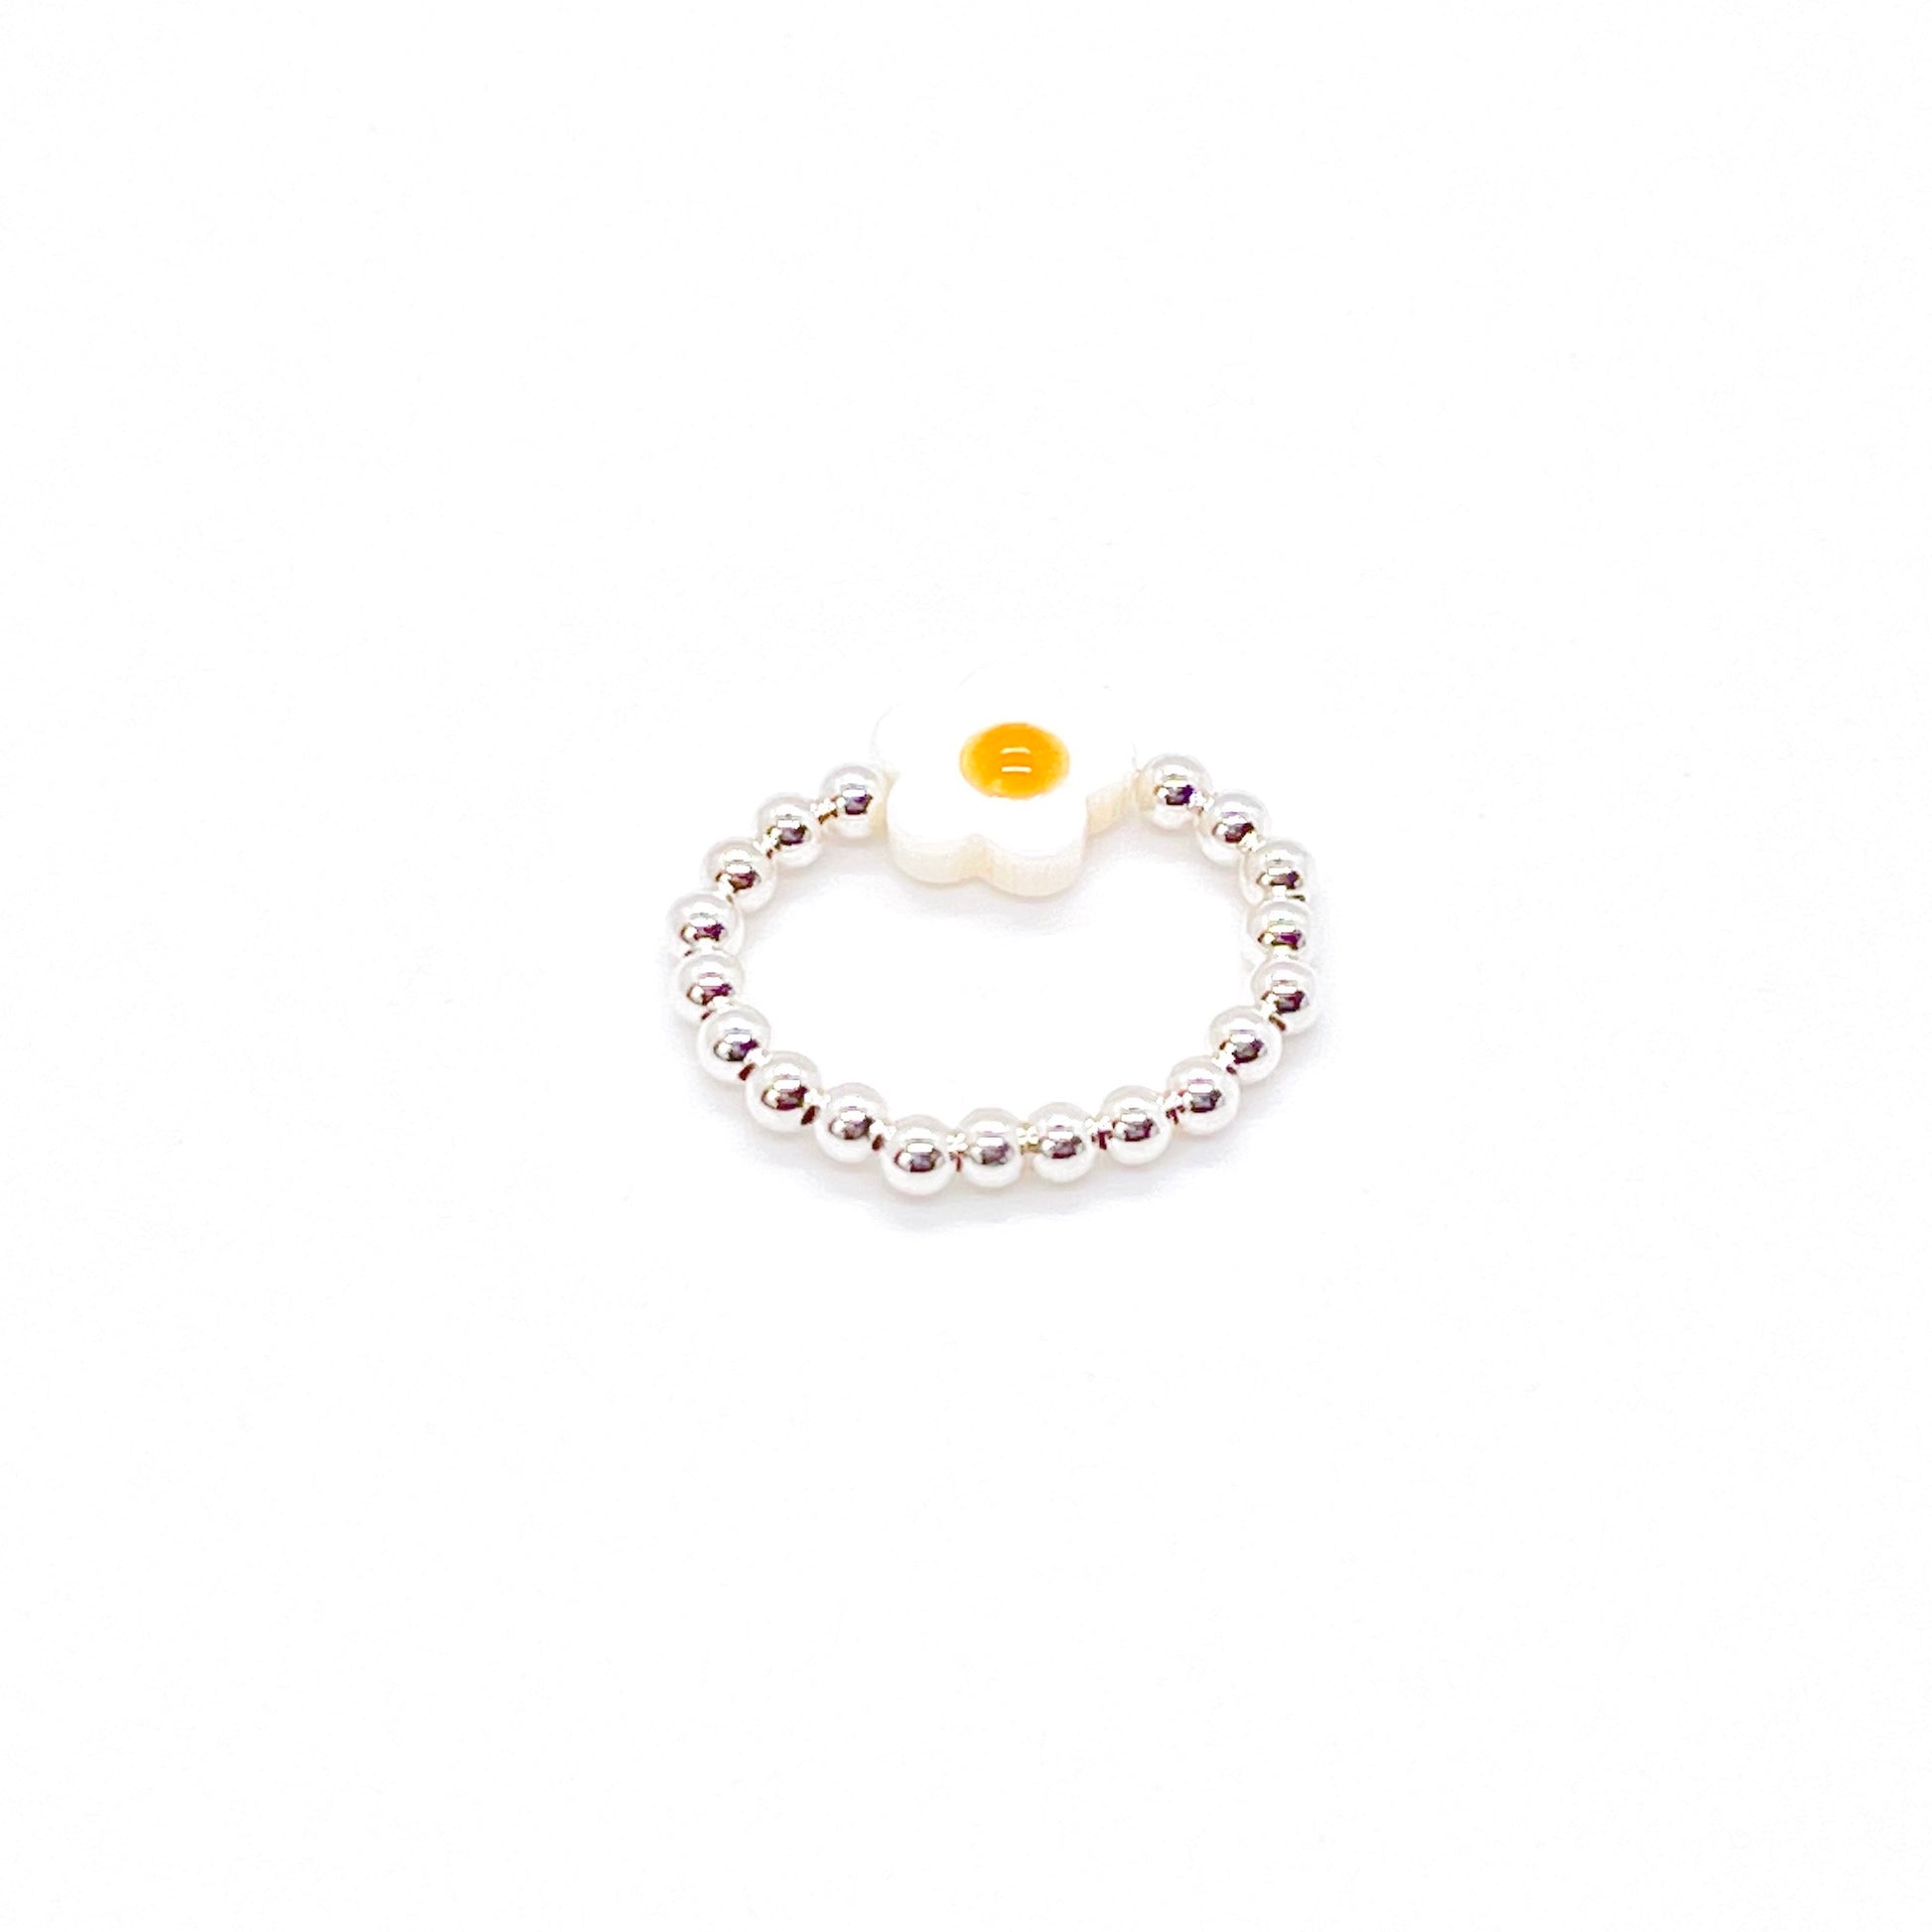 Flower bead ring with a sterling silver 3mm ball bead stretch band and a white and yellow shell flower bead.